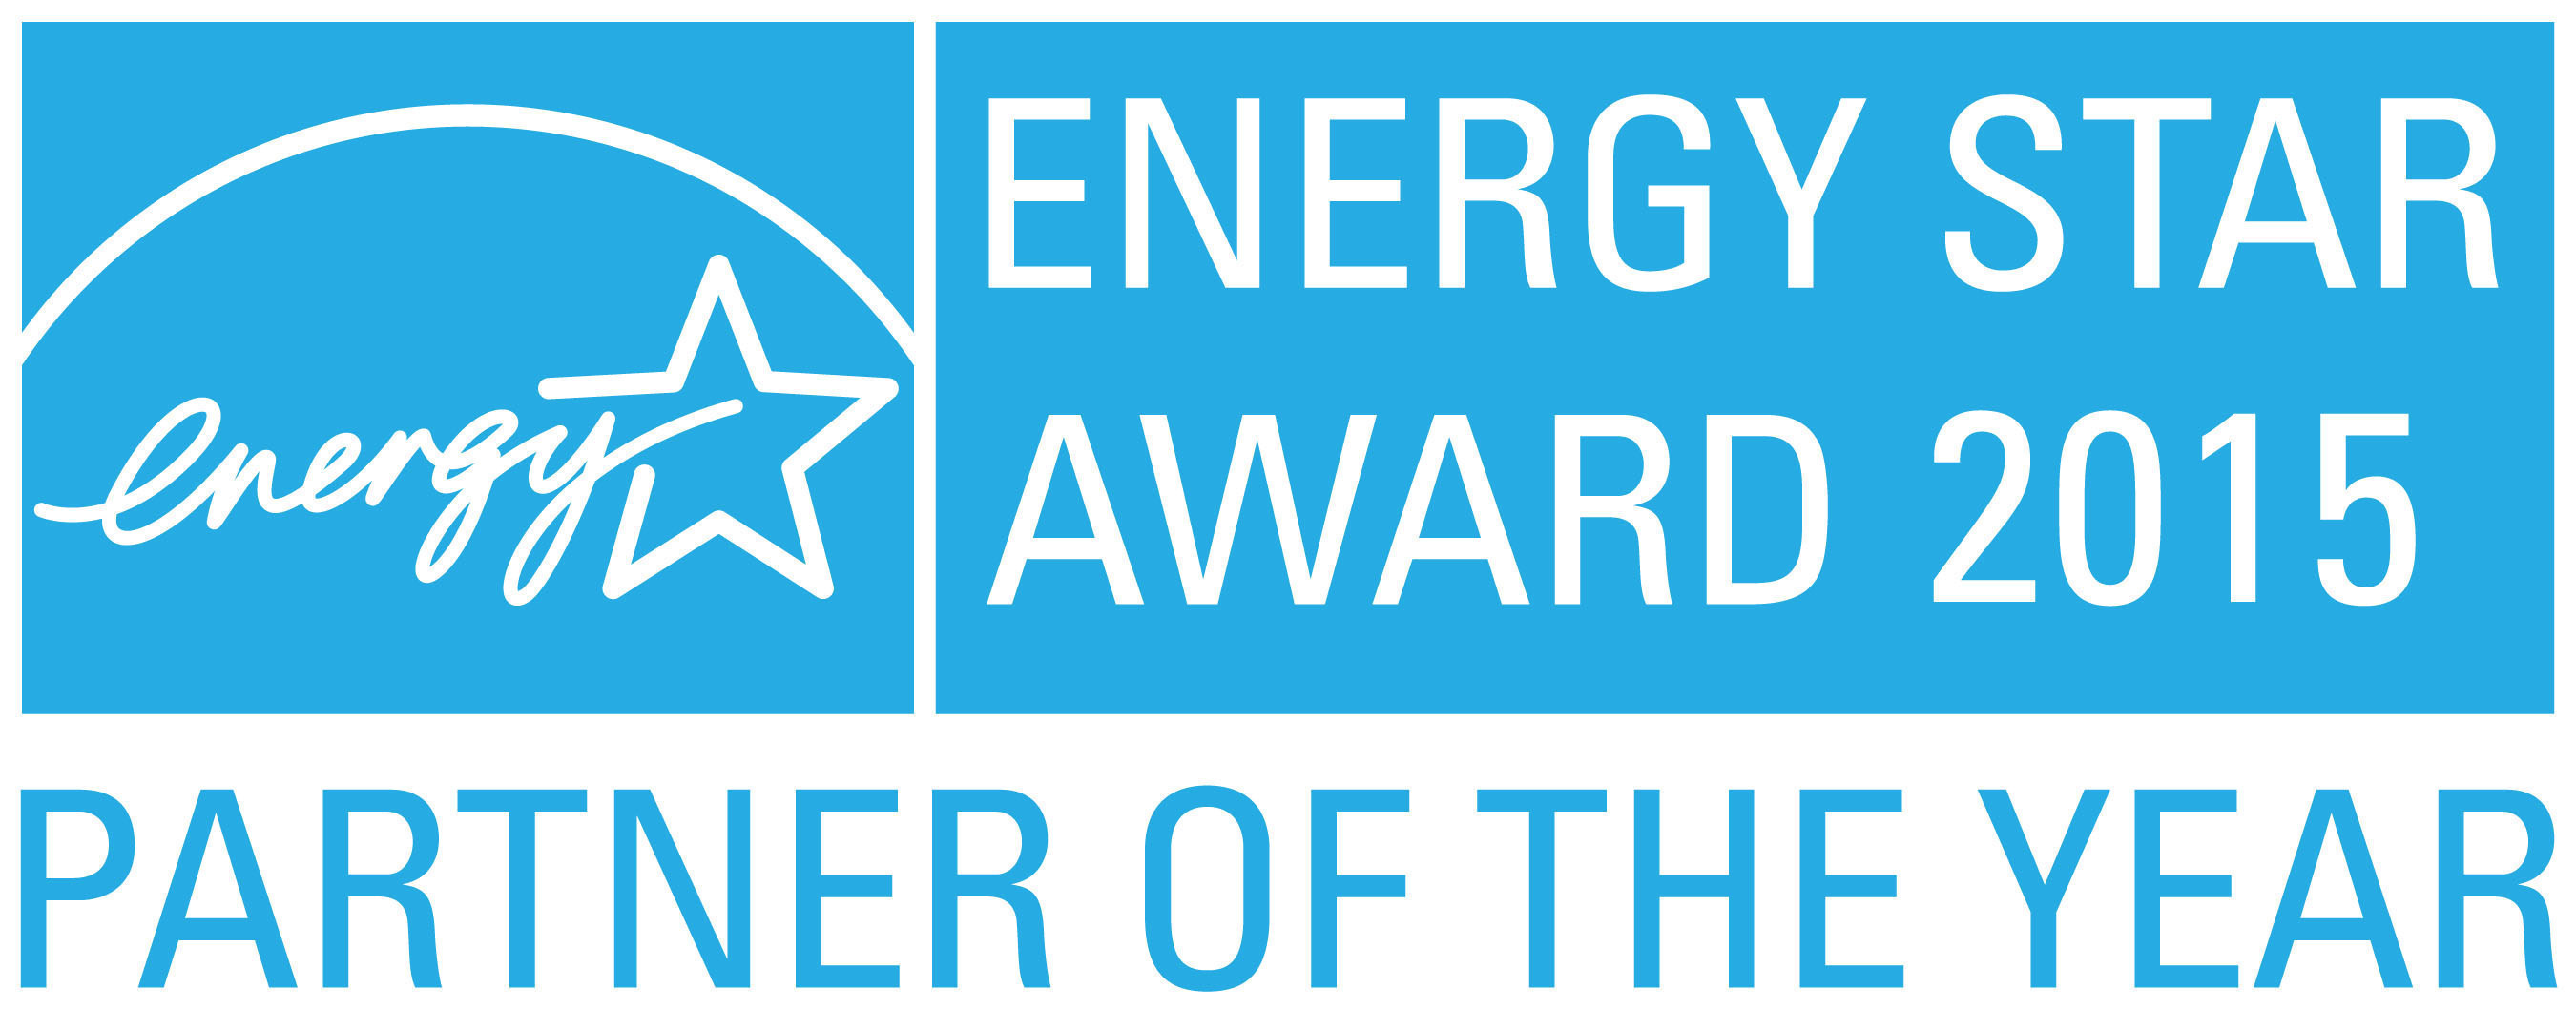 ENERGY STAR 2015 Partner of the Year